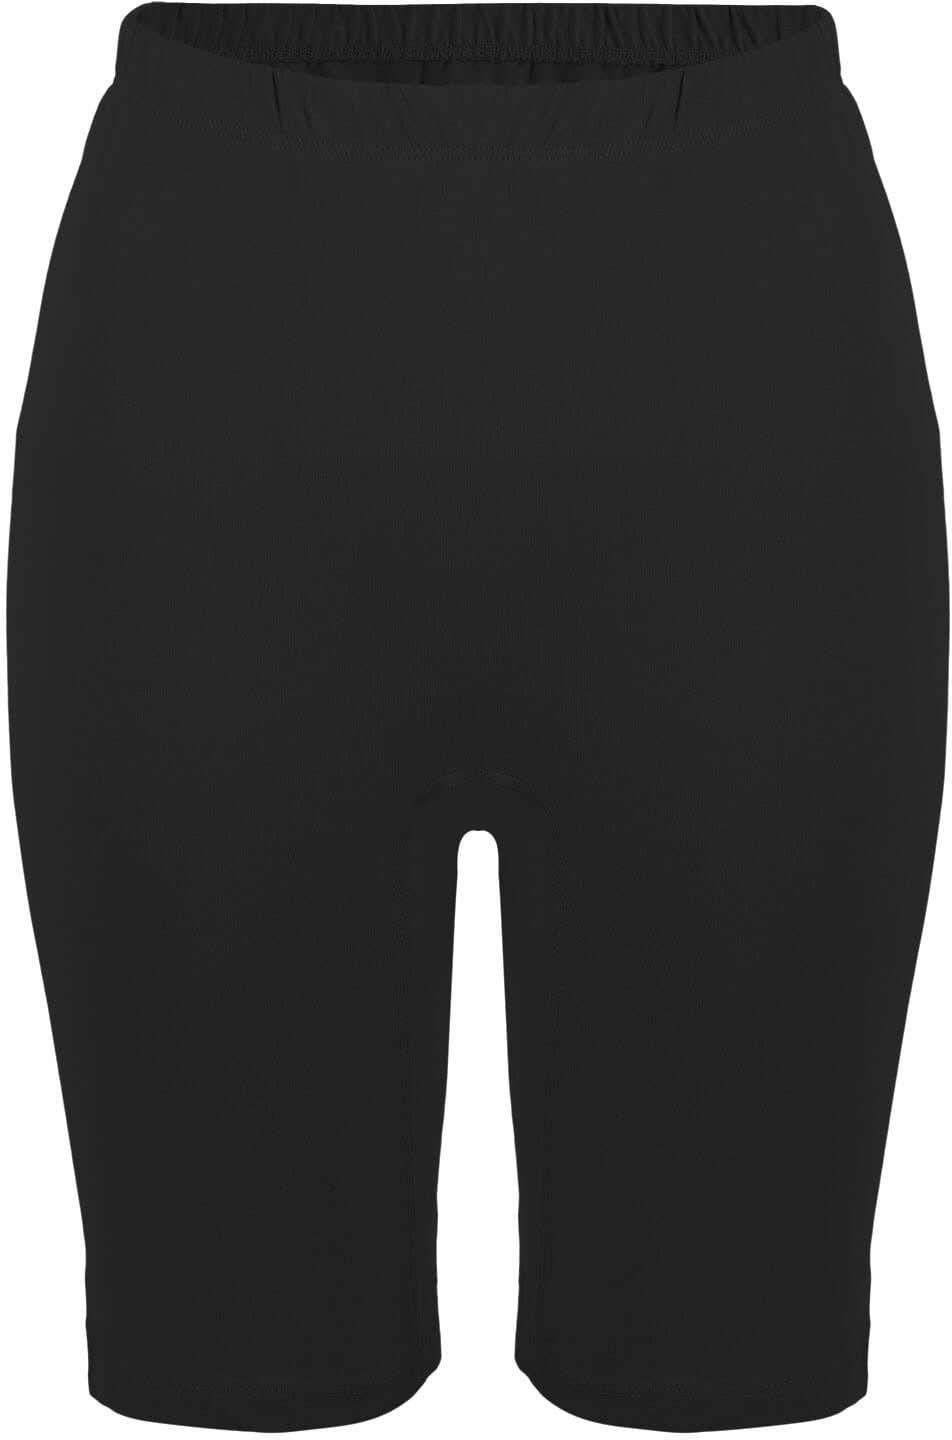 Get Dice Long Cotton Under Shorts for Women, Size 2XL with best offers | Raneen.com